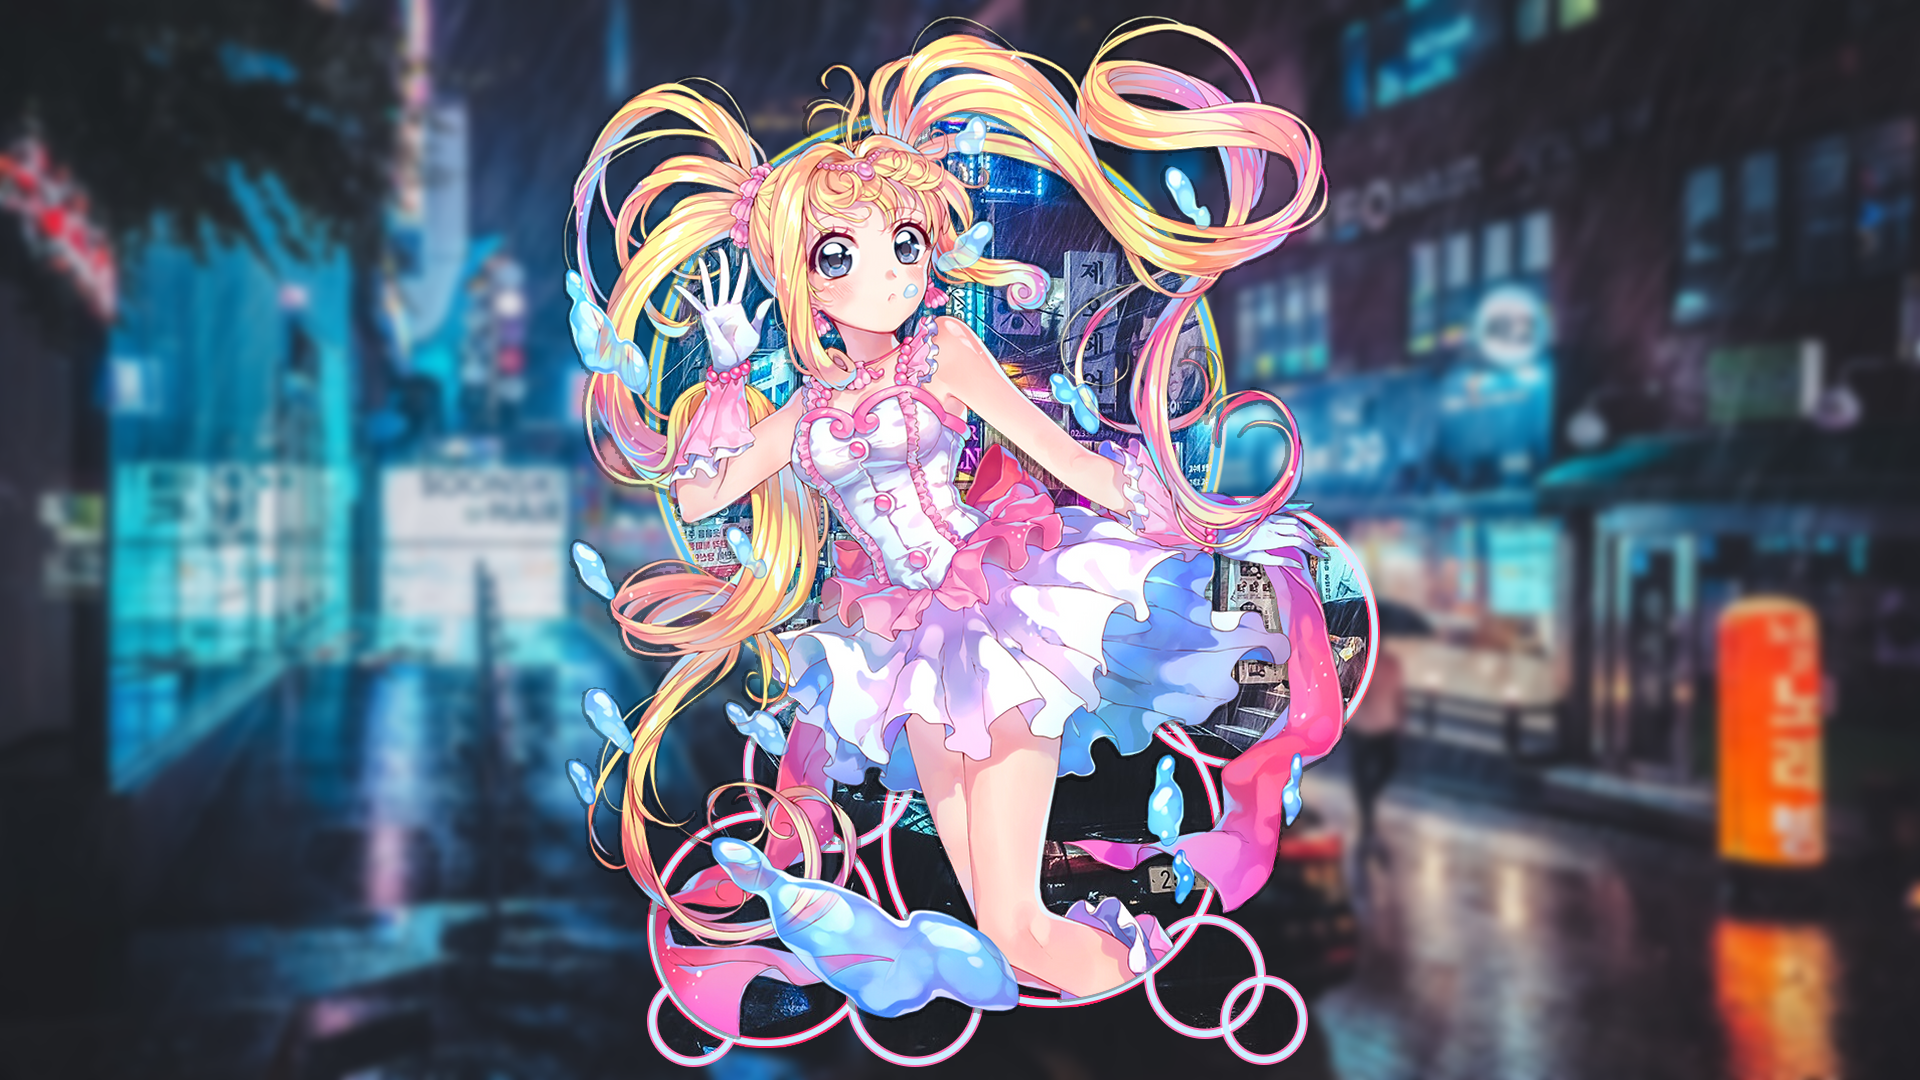 Anime Girls Picture In Picture Mermaid Melody South Korea Rain 1920x1080